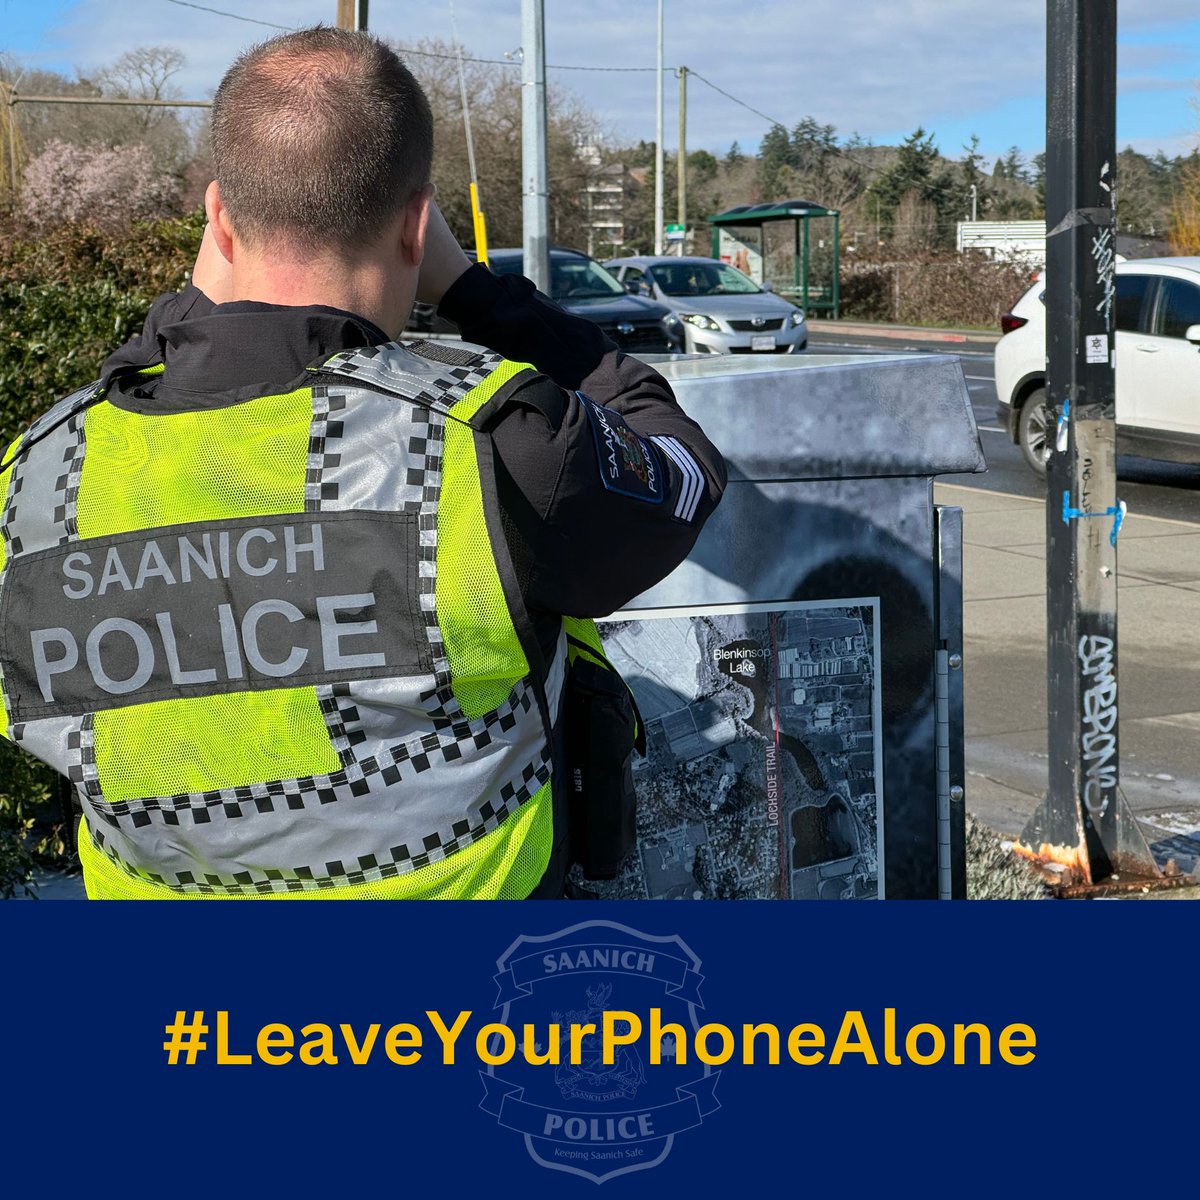 157 tickets for distracted driving!
Our officers spent approximately 66 hours dedicated to distracted driving enforcement during the month of March and issued 157 tickets.
Please remember to #LeaveYourPhoneAlone
You’re 3.6 times more likely to crash if you’re using your phone…